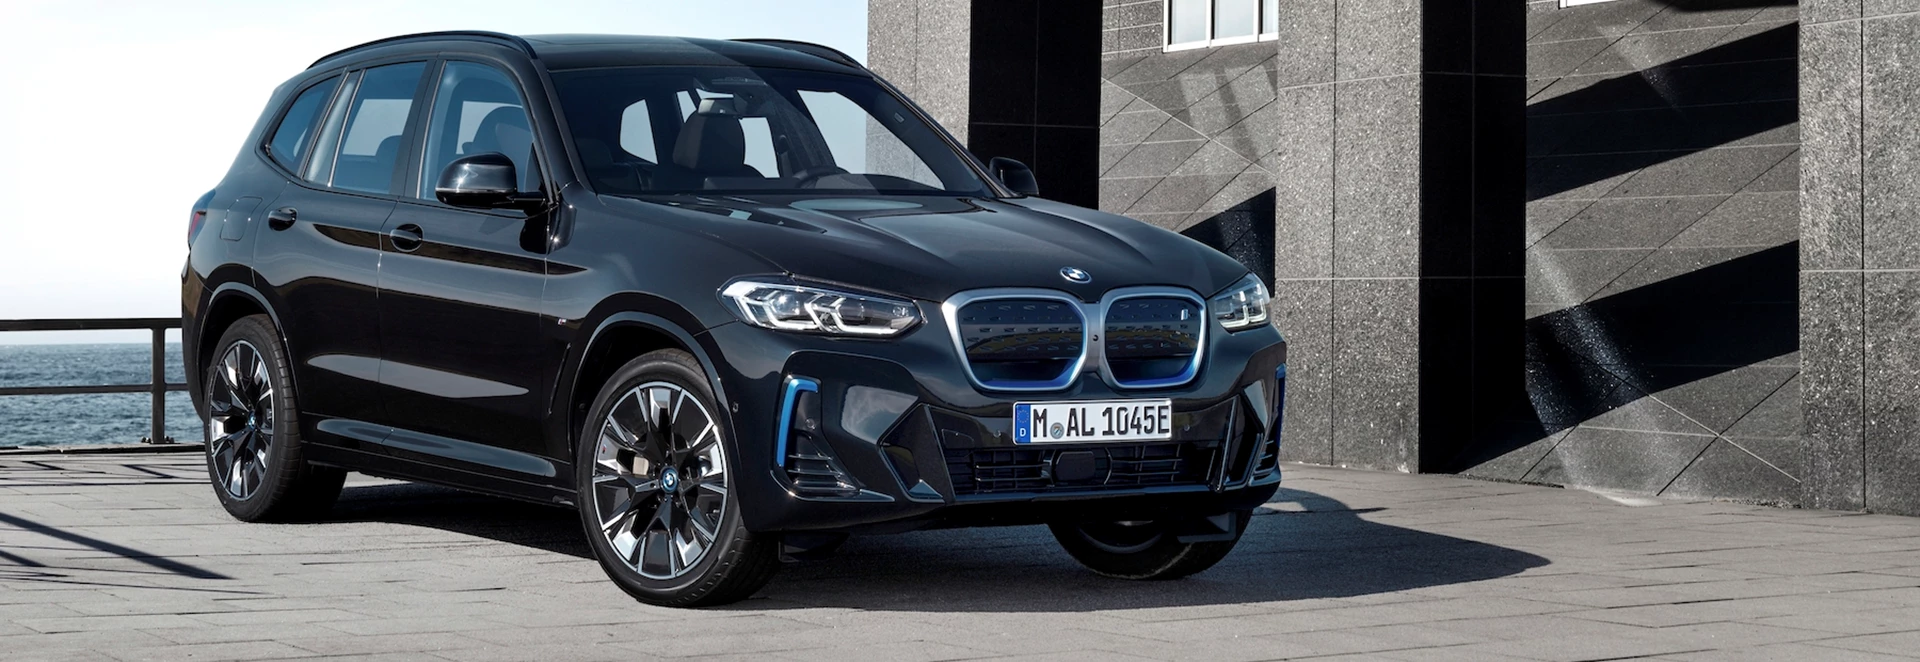 BMW reveals updated electric iX3 SUV with new styling and M Sport grades 